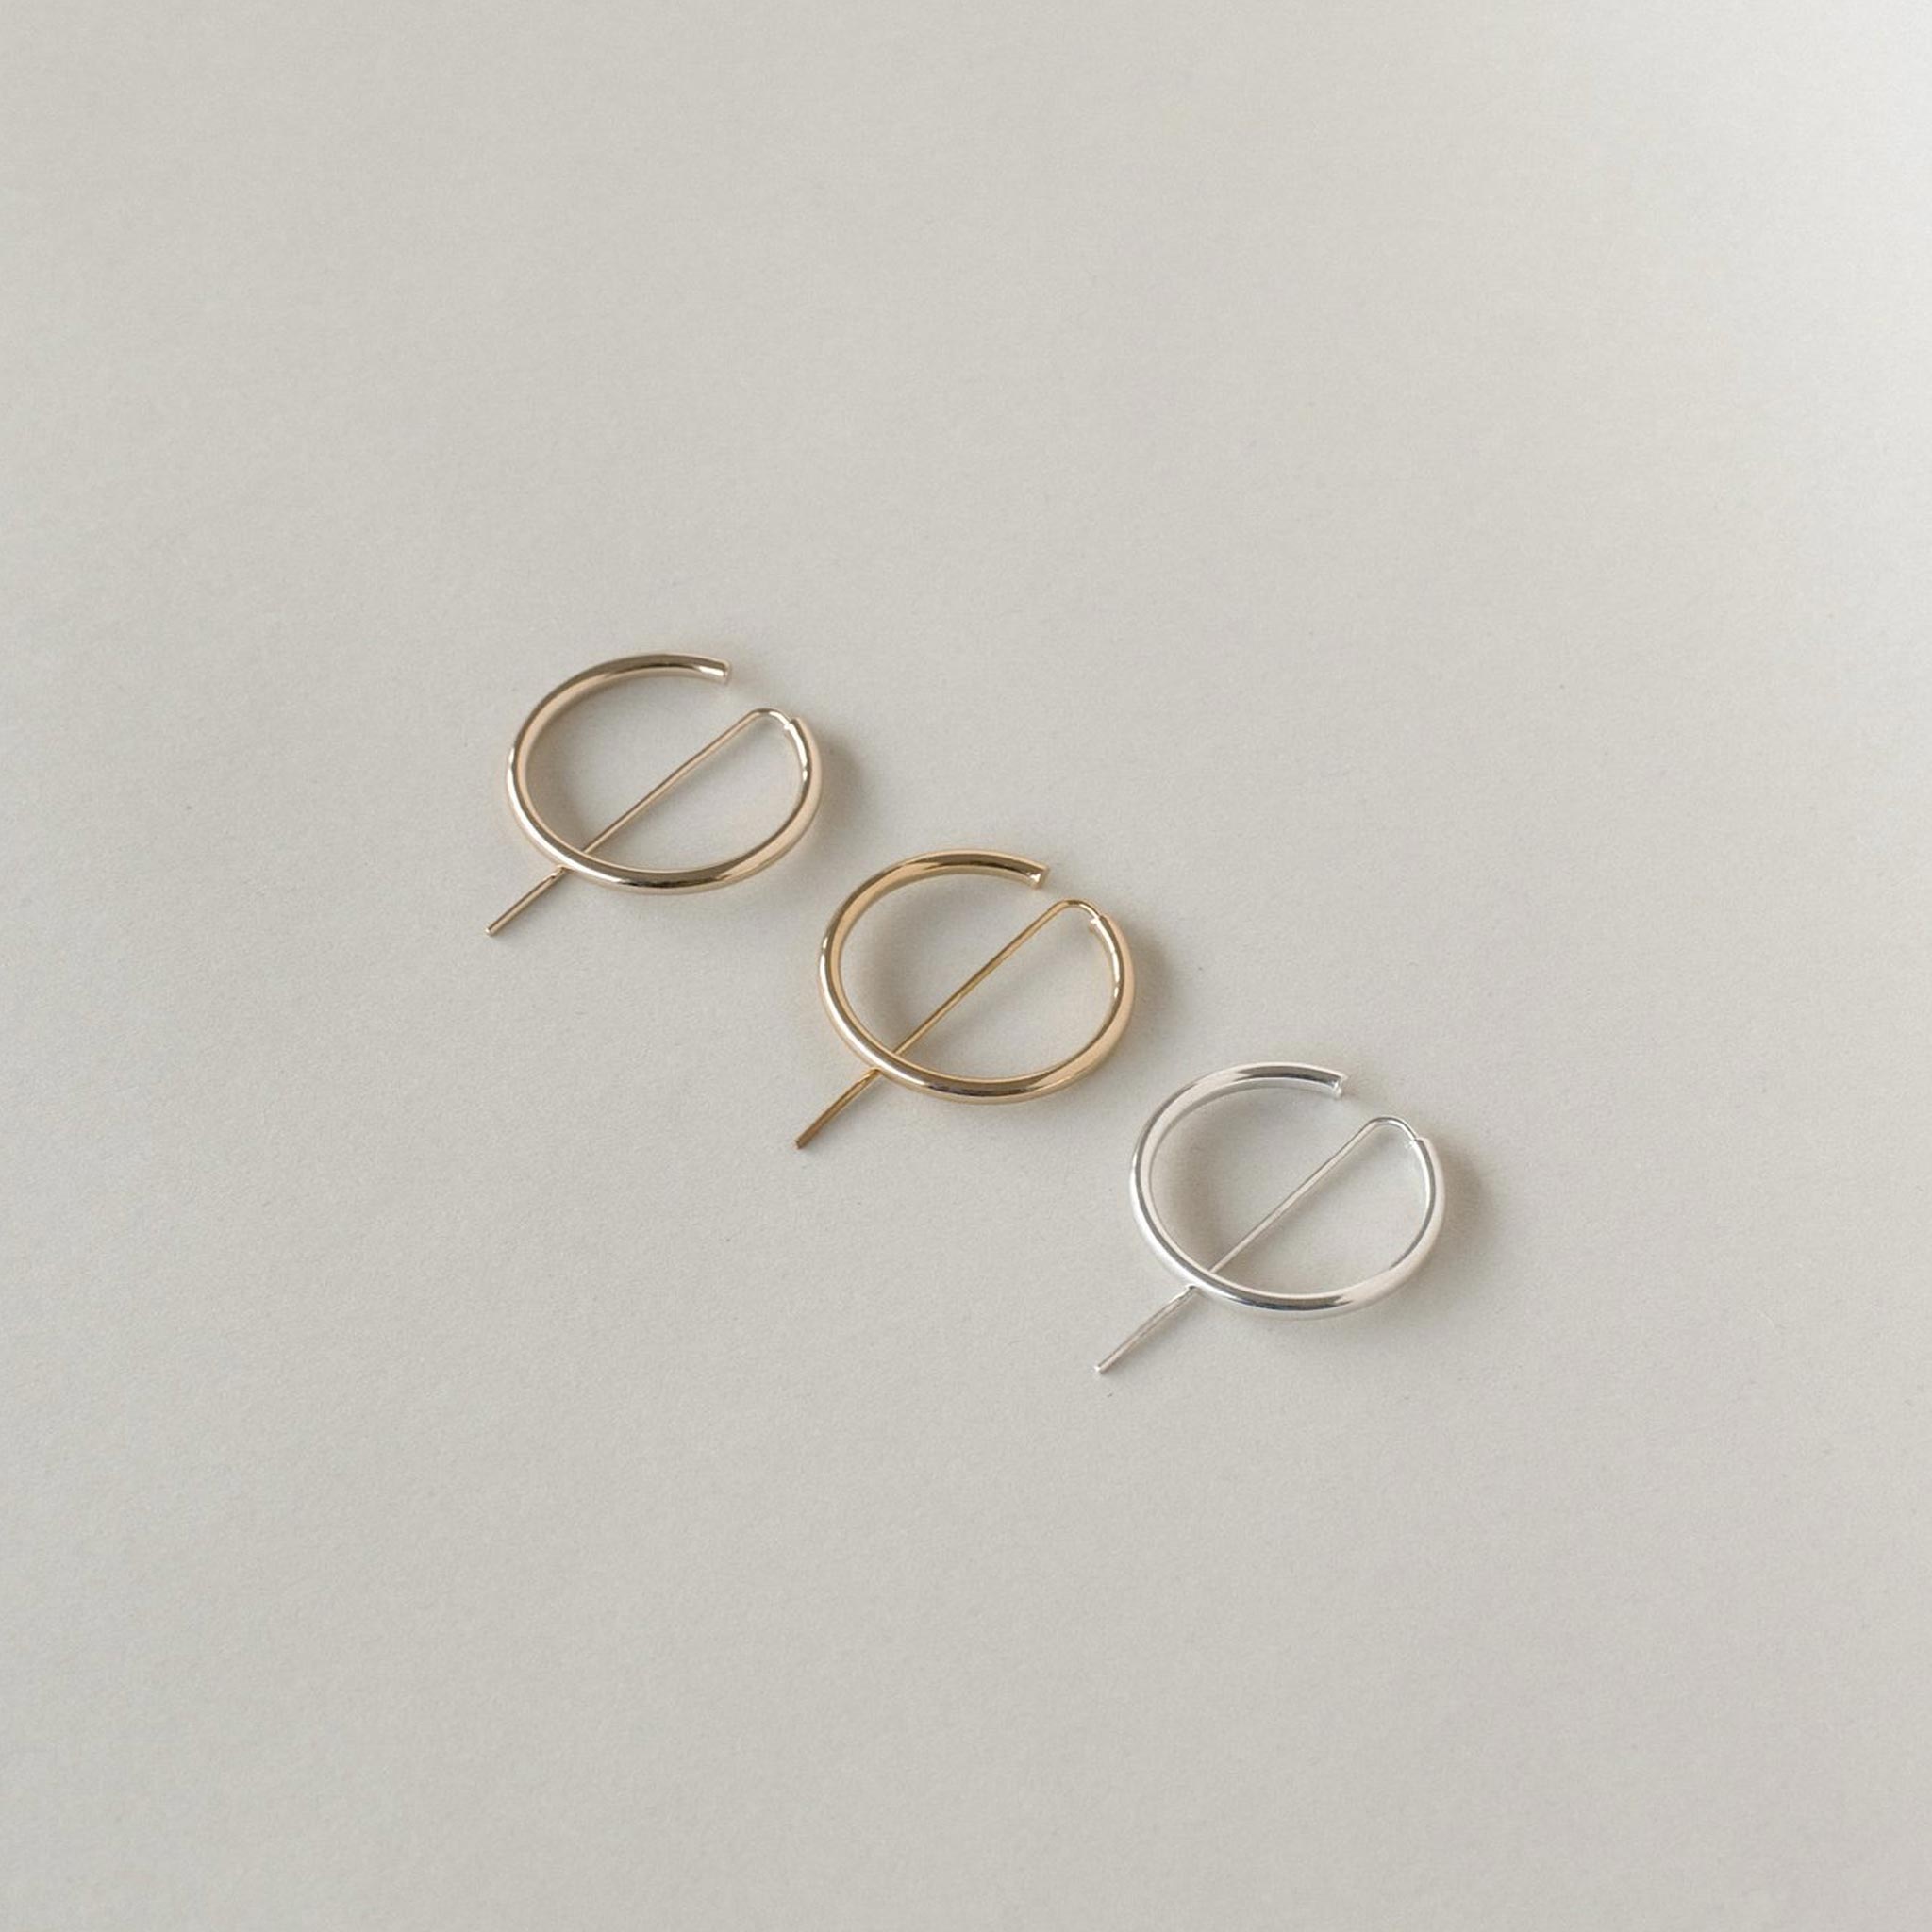 Jaclyn Moran Jewelry - Hoop & Post Earrings in Rose Gold, Yellow Gold and Sterling Silver.